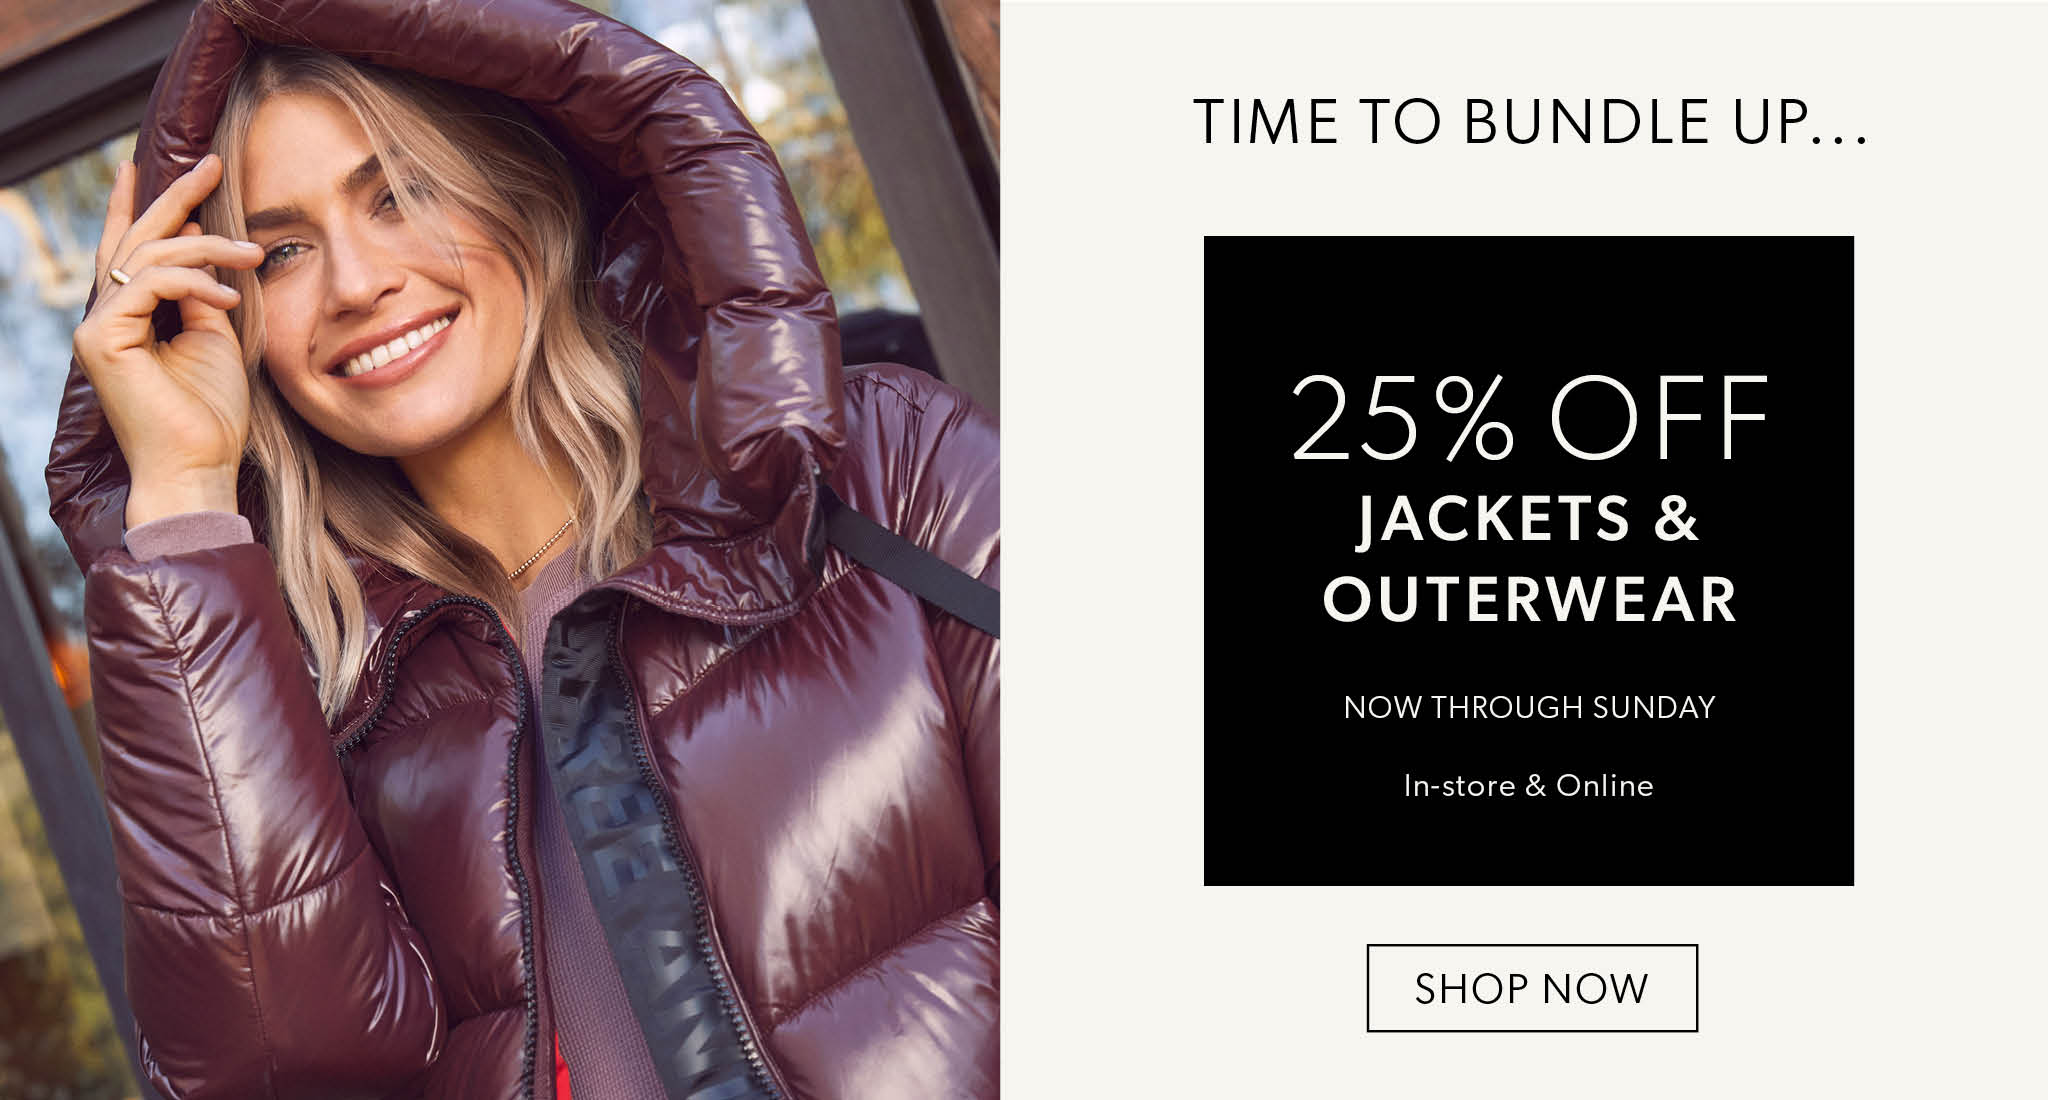 25% Off Jackets & Outerwear, Now Through Sunday. - Shop Now.